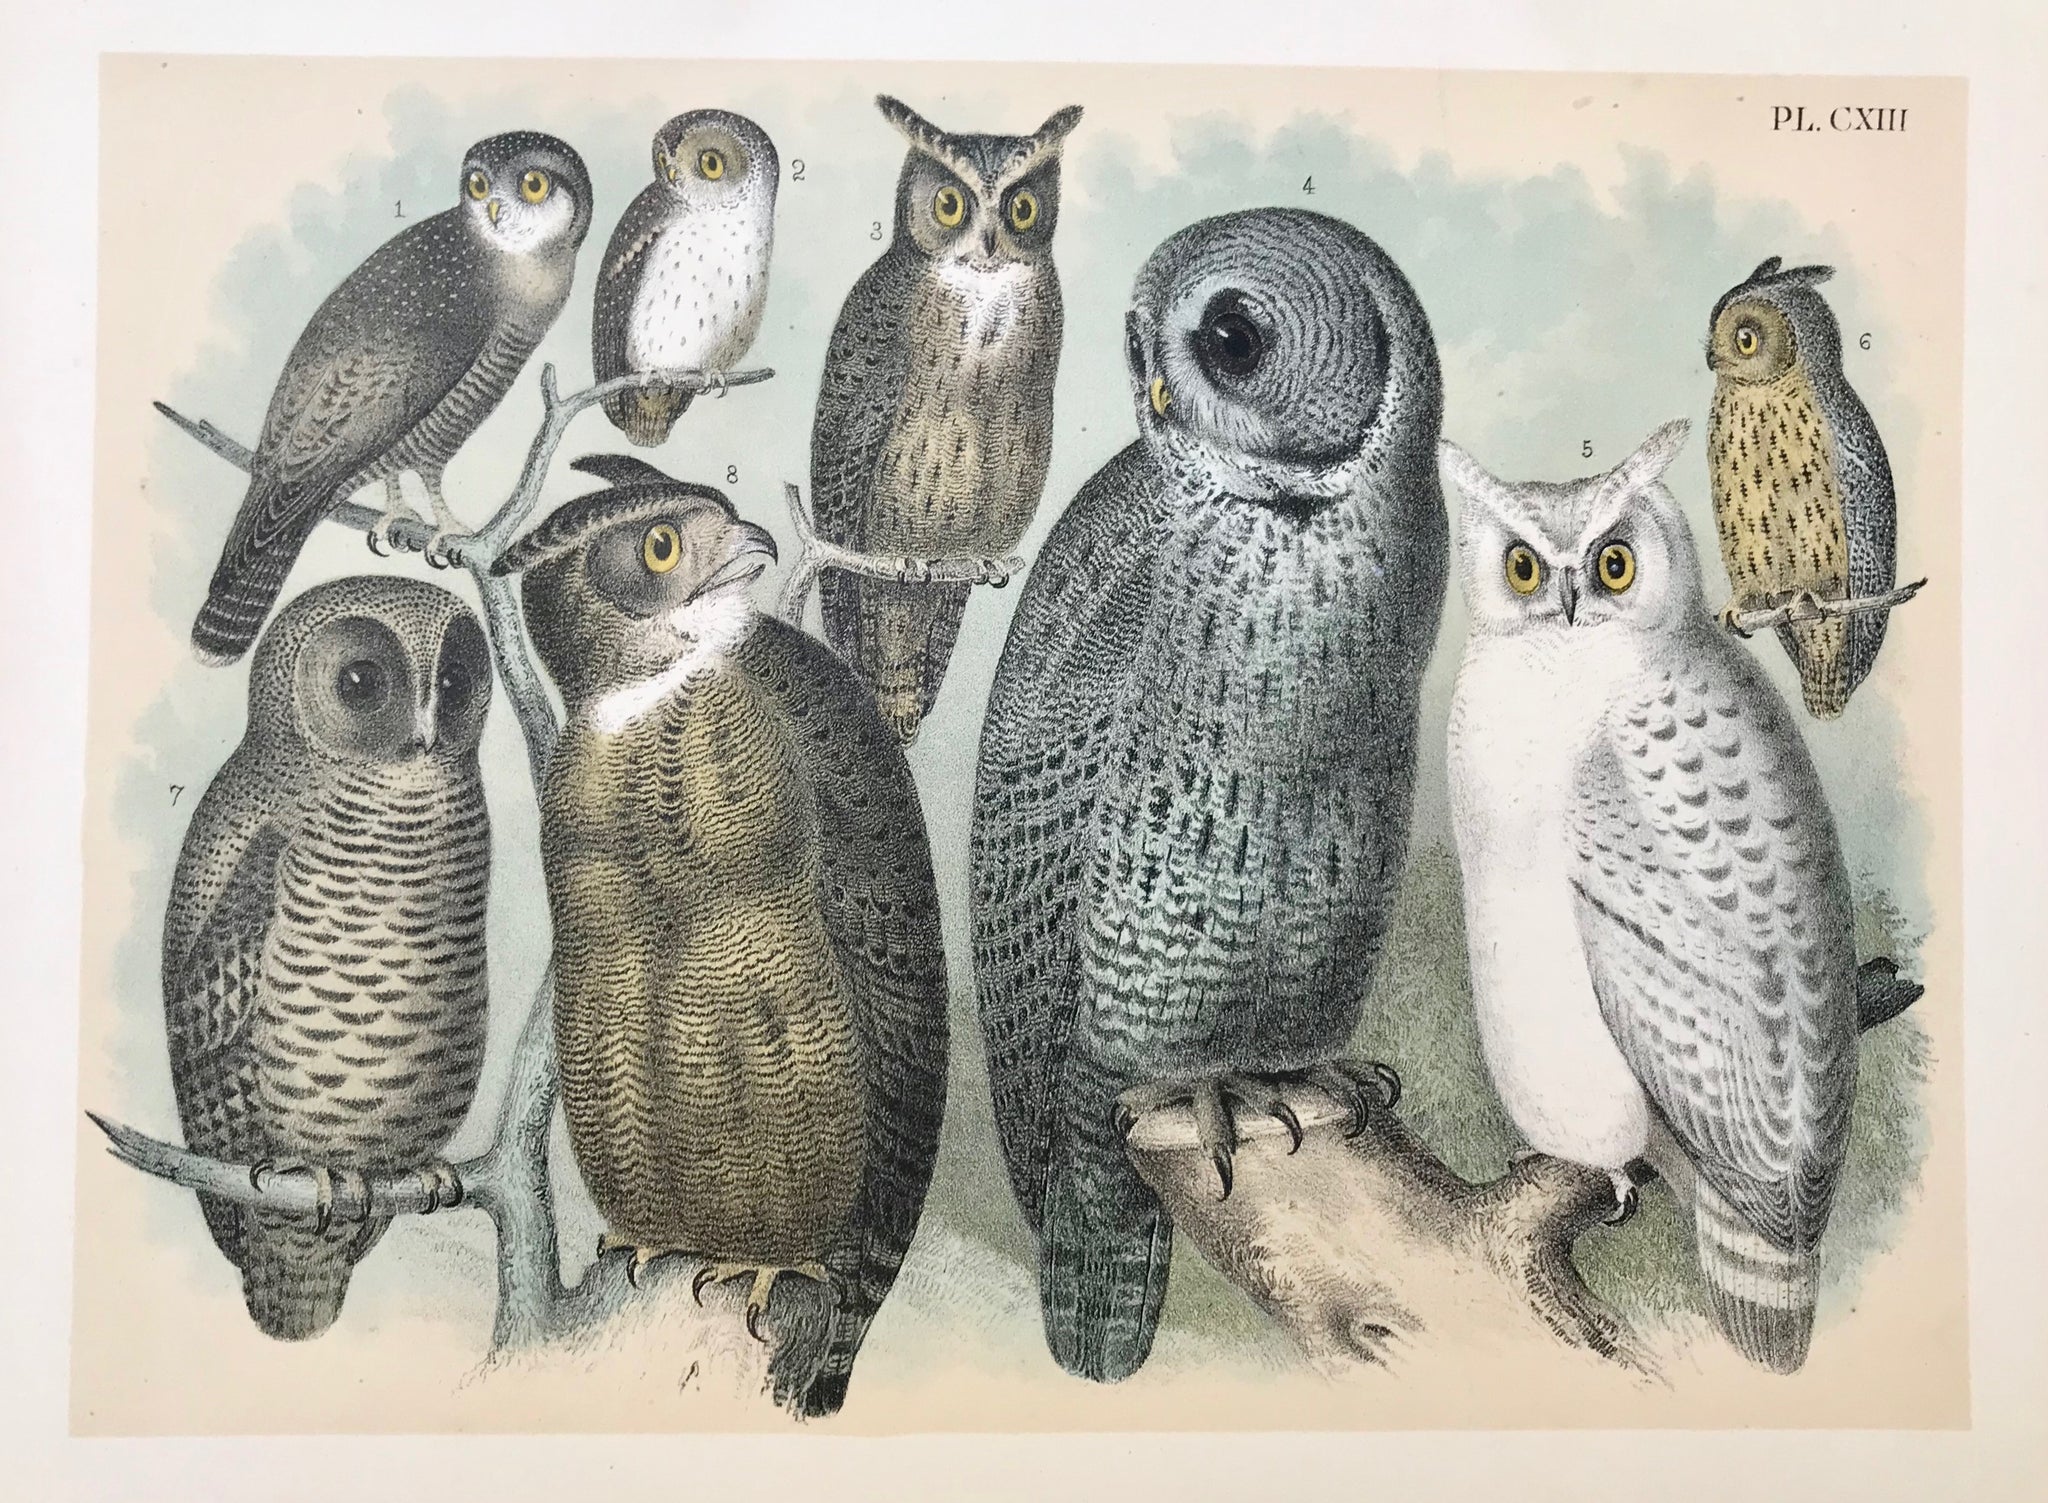 Owls: No title. Various, altogether eight owls.  Anonymous lithograph. No printing details, except plate number (CXIII) given. Mounted on cardboard. Printed in color. Ca. 1880